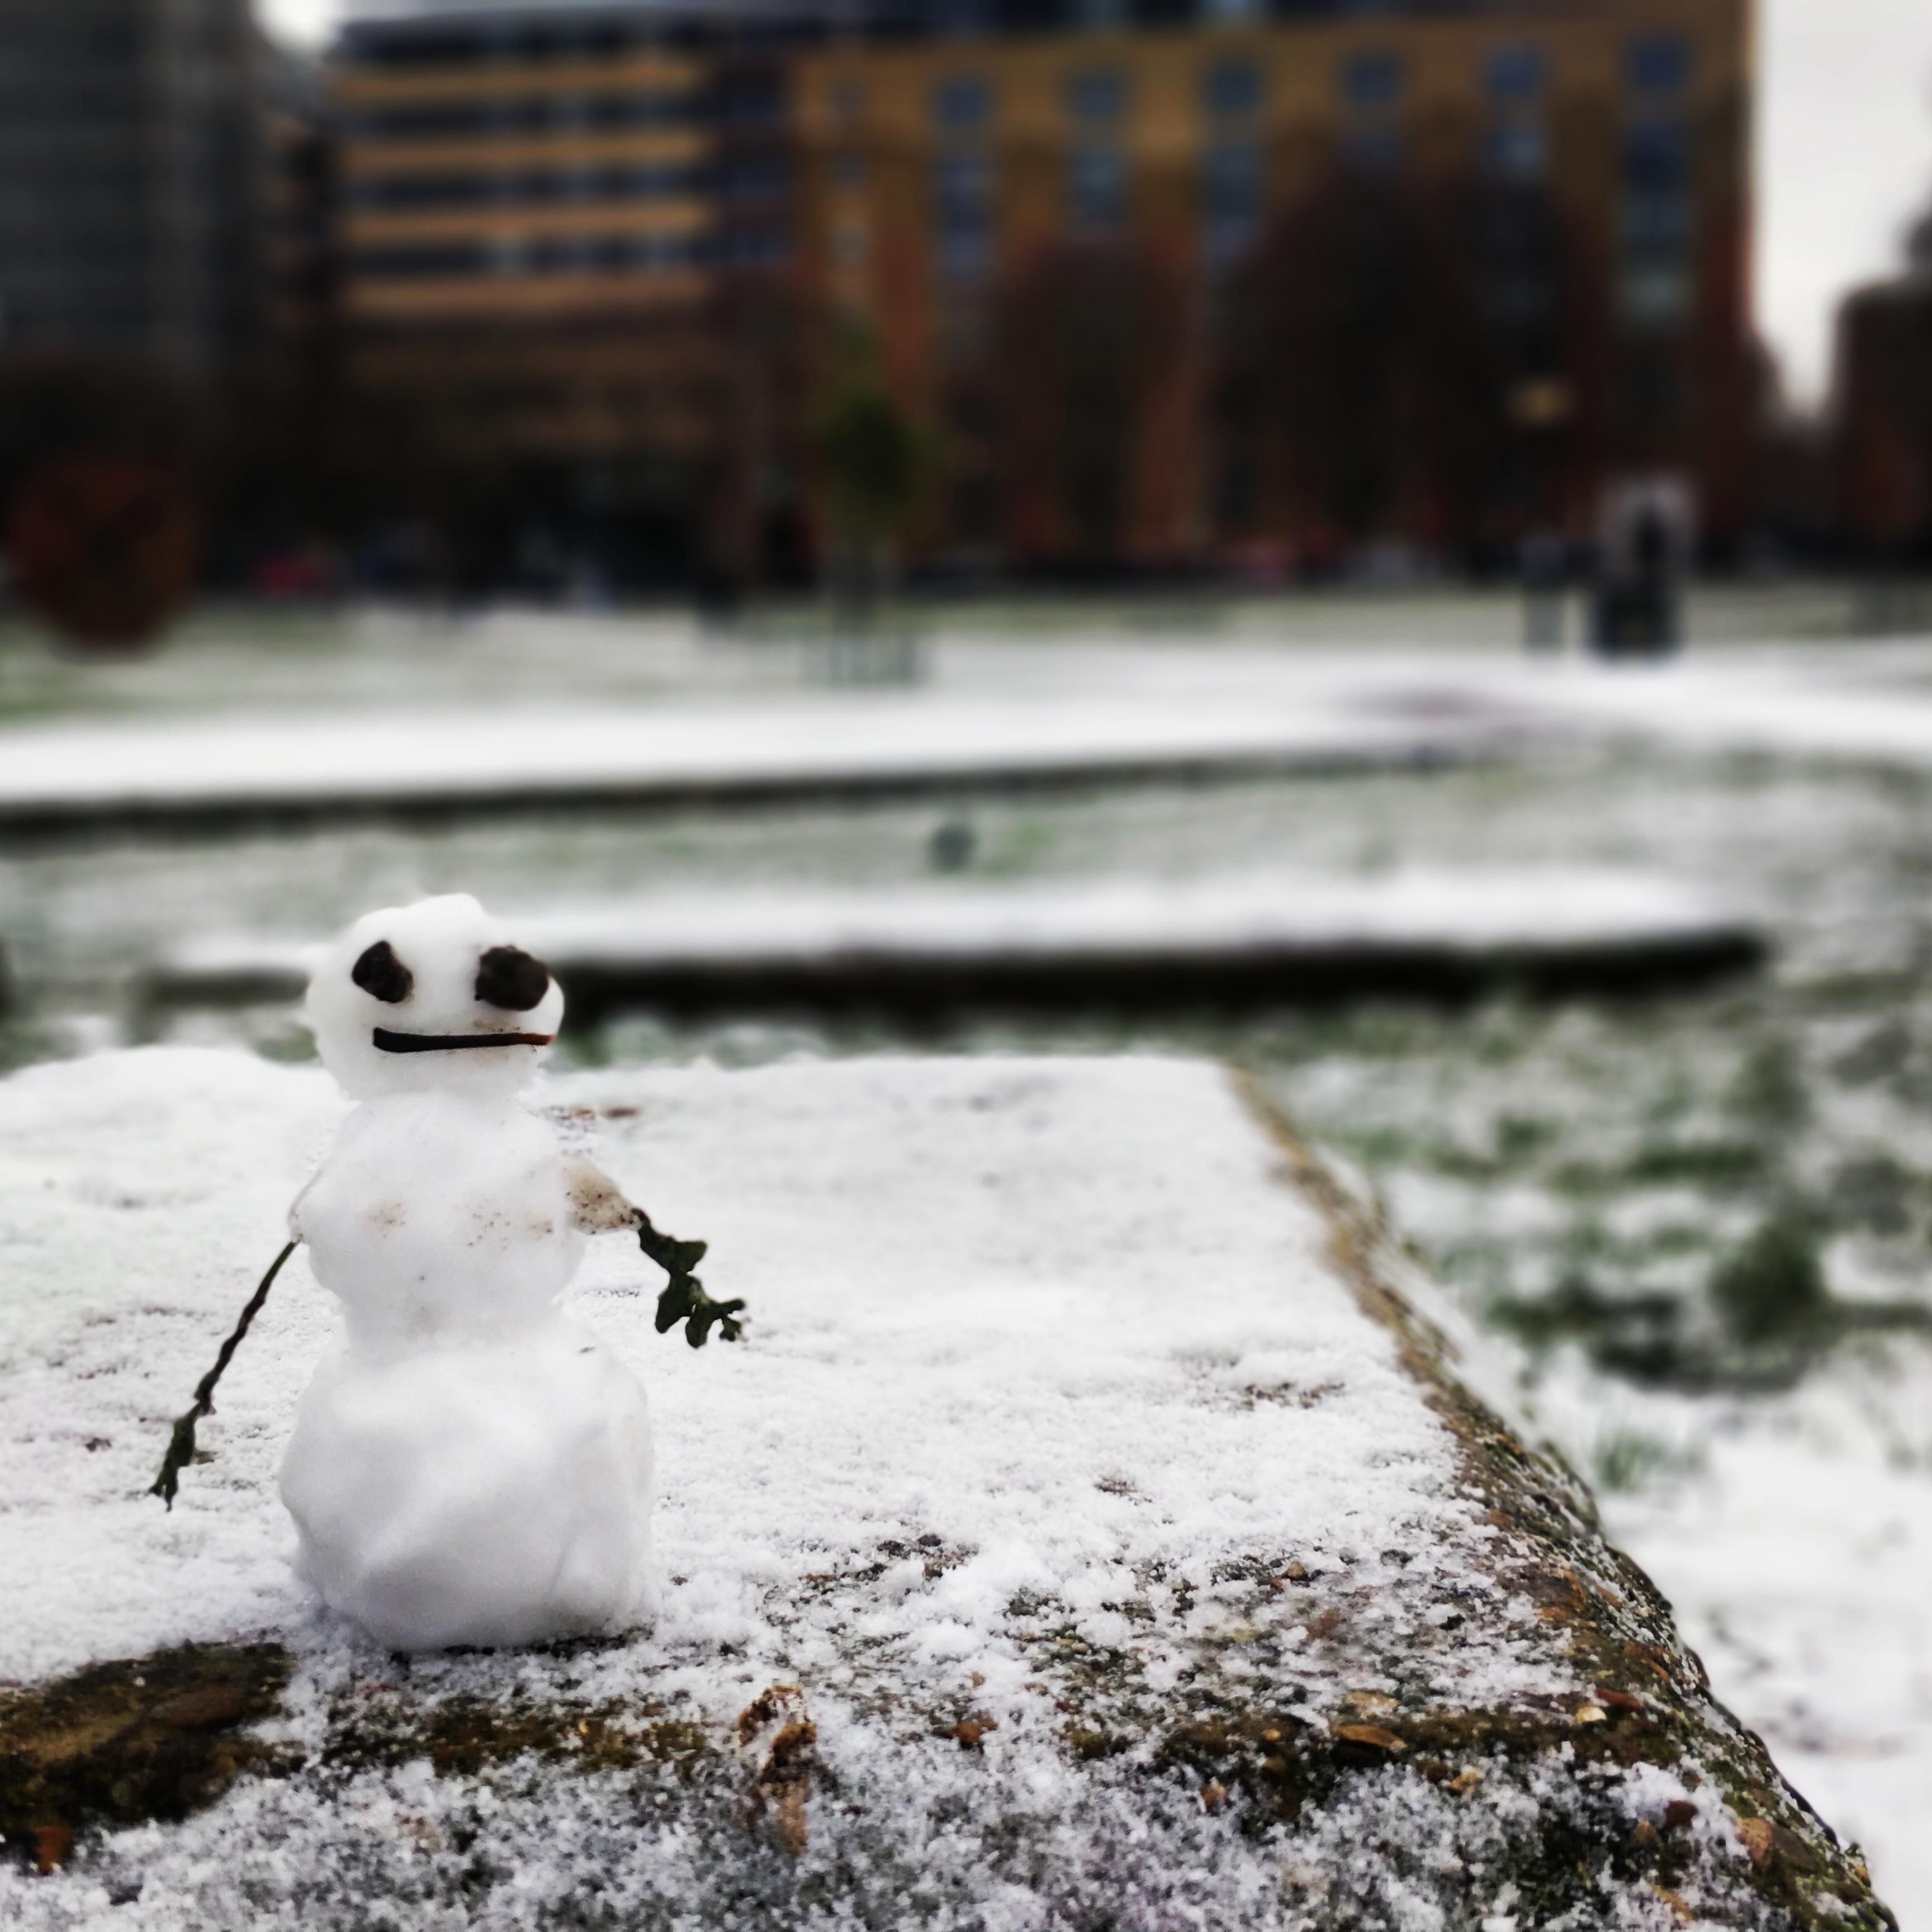 Where I'm from it doesn't snow, so this is my first snowman now I'm in Europe. It's not very good but I hope it brightens your day!